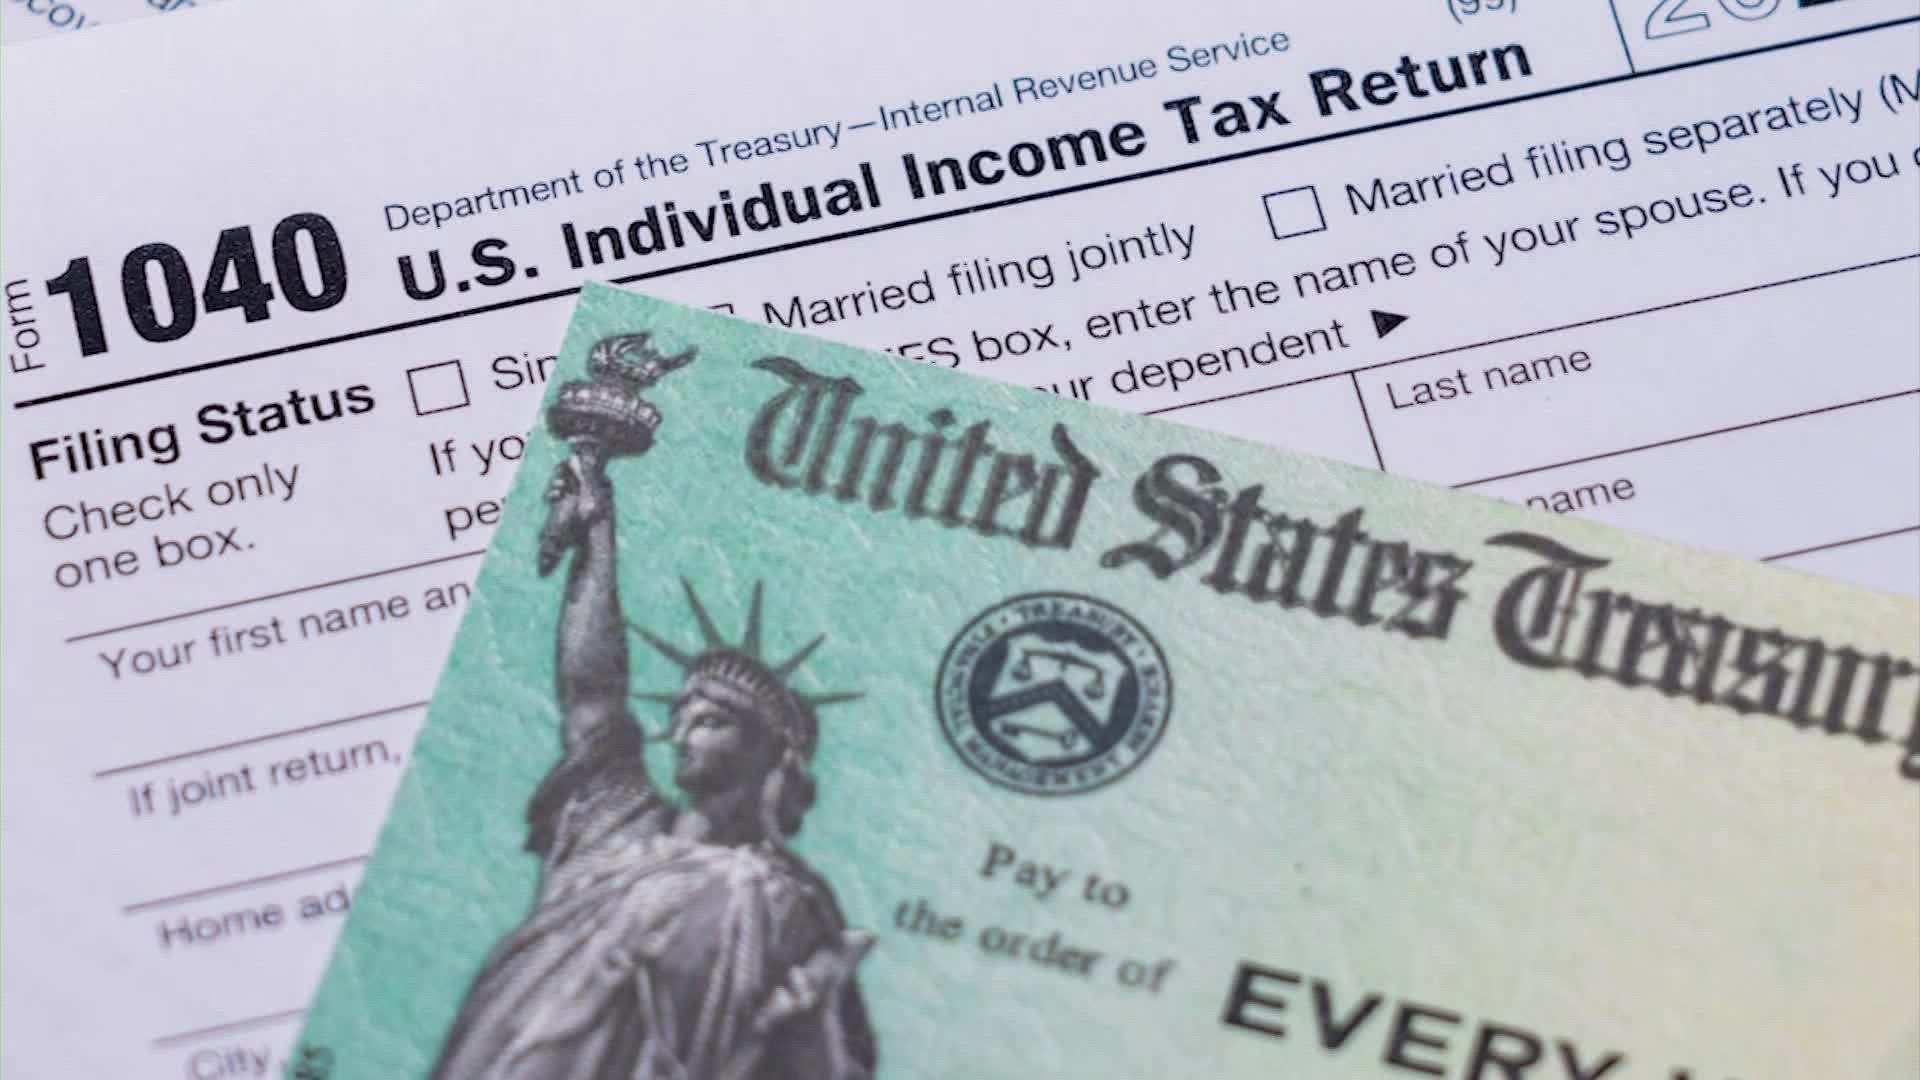 KHOU 11 reporter Tiffany Craig explains why millions of Americans are getting letters from the IRS telling them their math is bad.